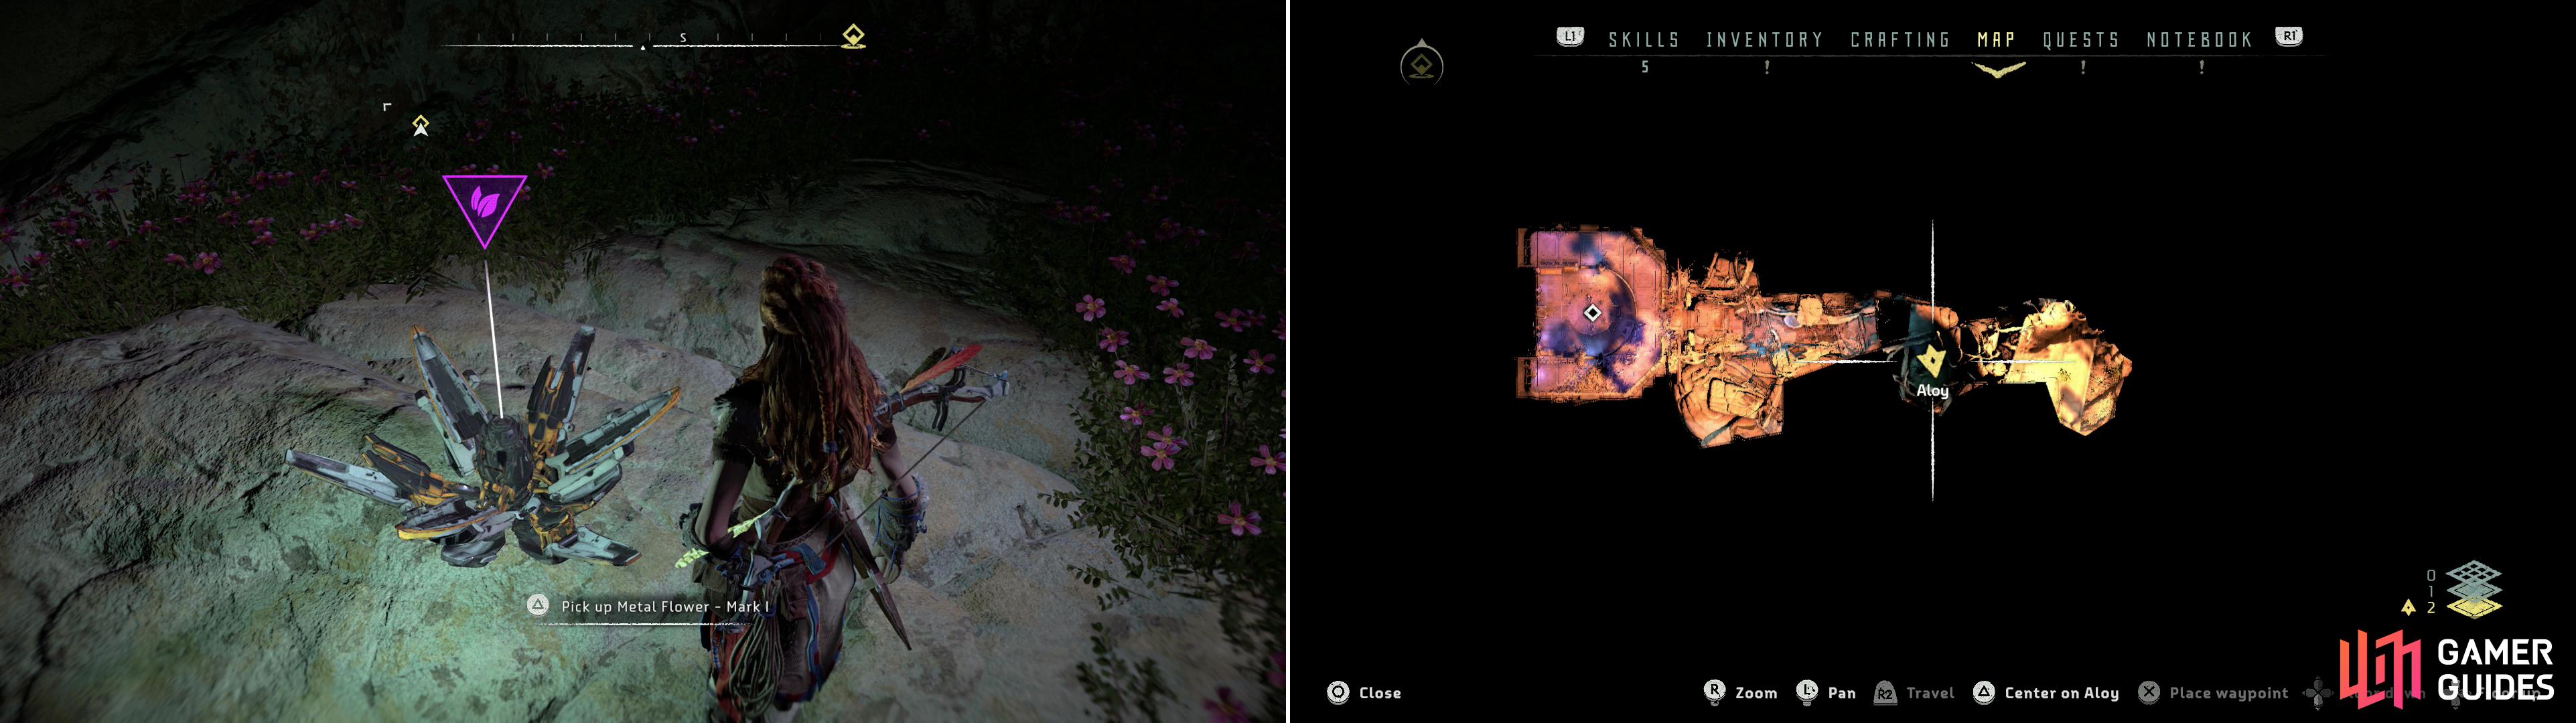 In some ancient ruins you’ll find Metal Flower - Mark I (F) (left) at the location indicated on the map (right).